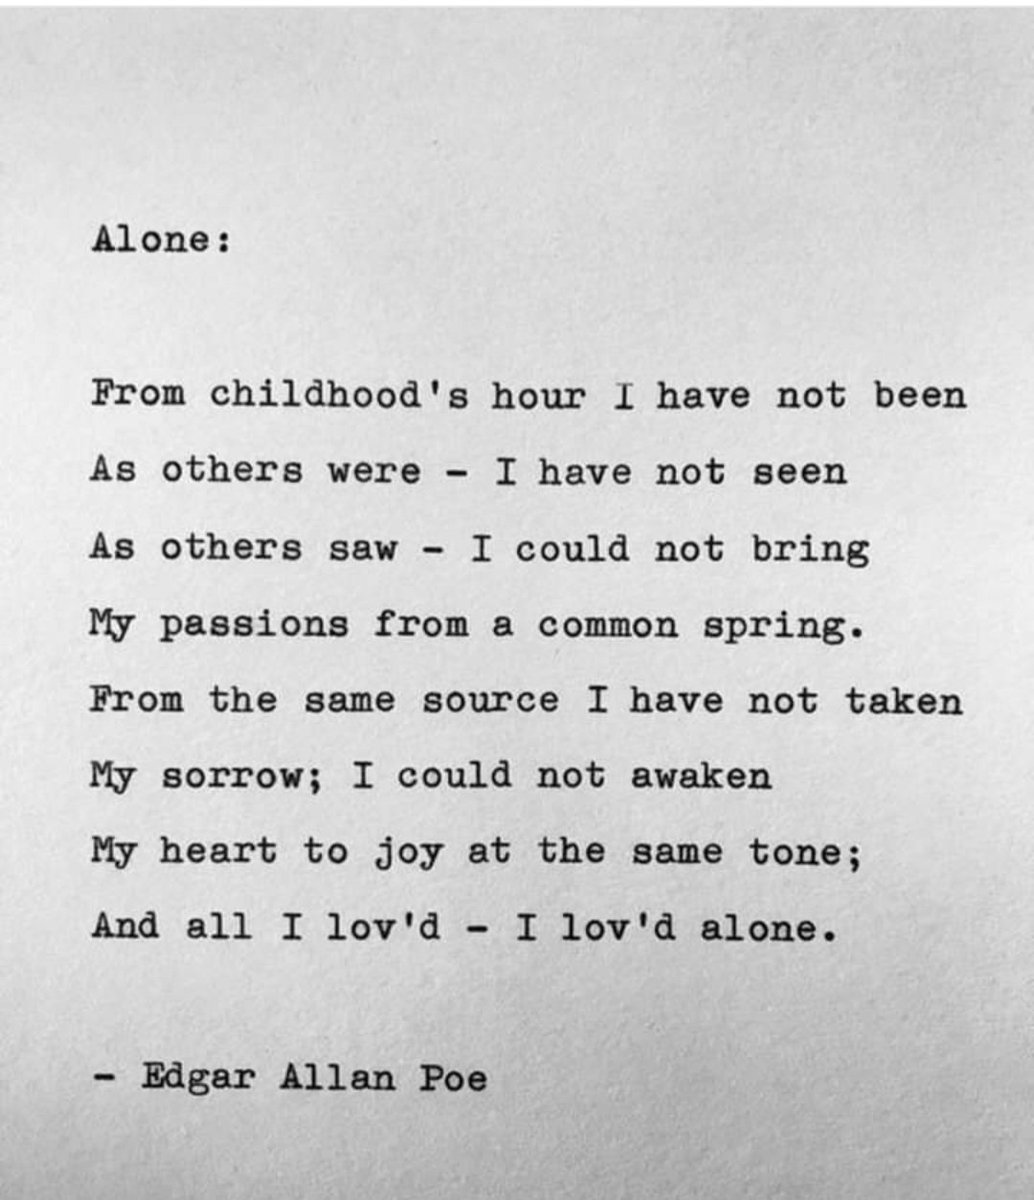 #Alone #EdgarAllanPoe #AmericanLiterature
I hope you heal from whatever hurt your heart.  You are incredible, and worthy of a big love.